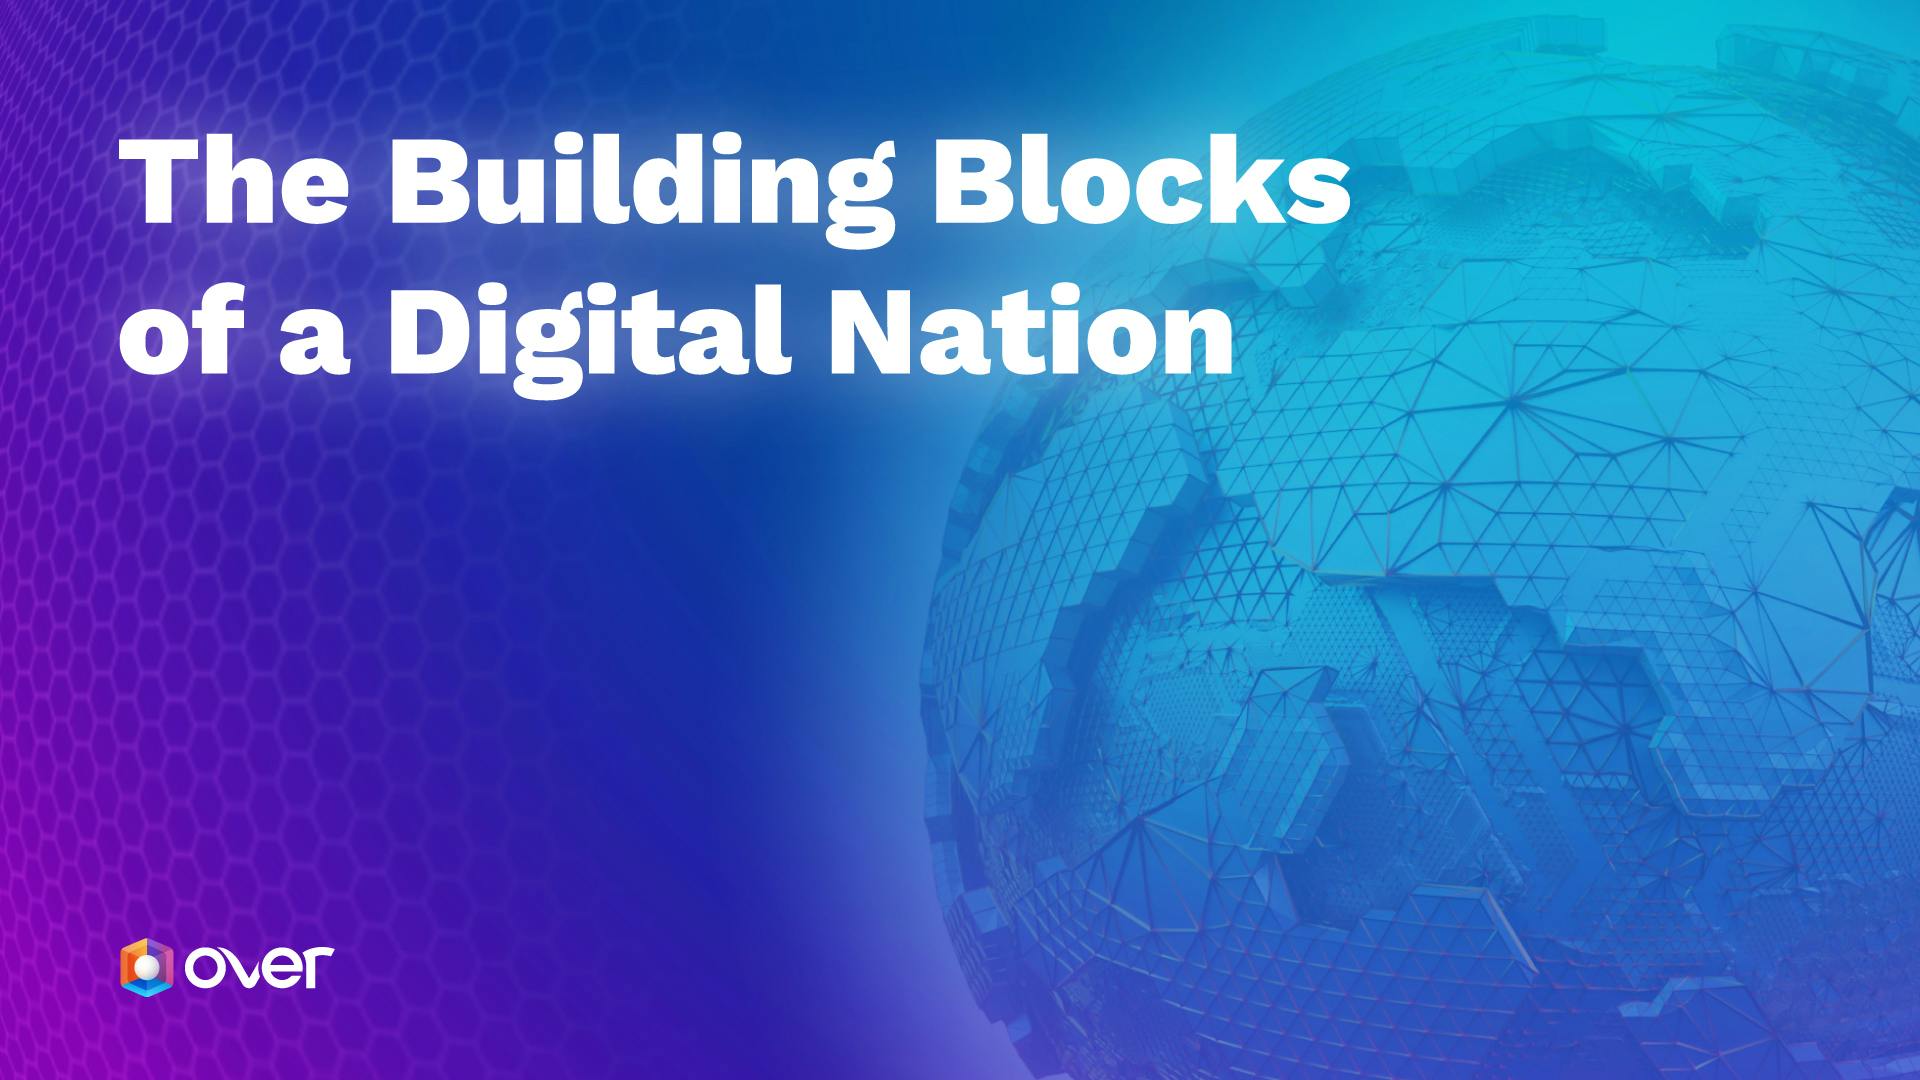 The Building Blocks of a Digital Nation